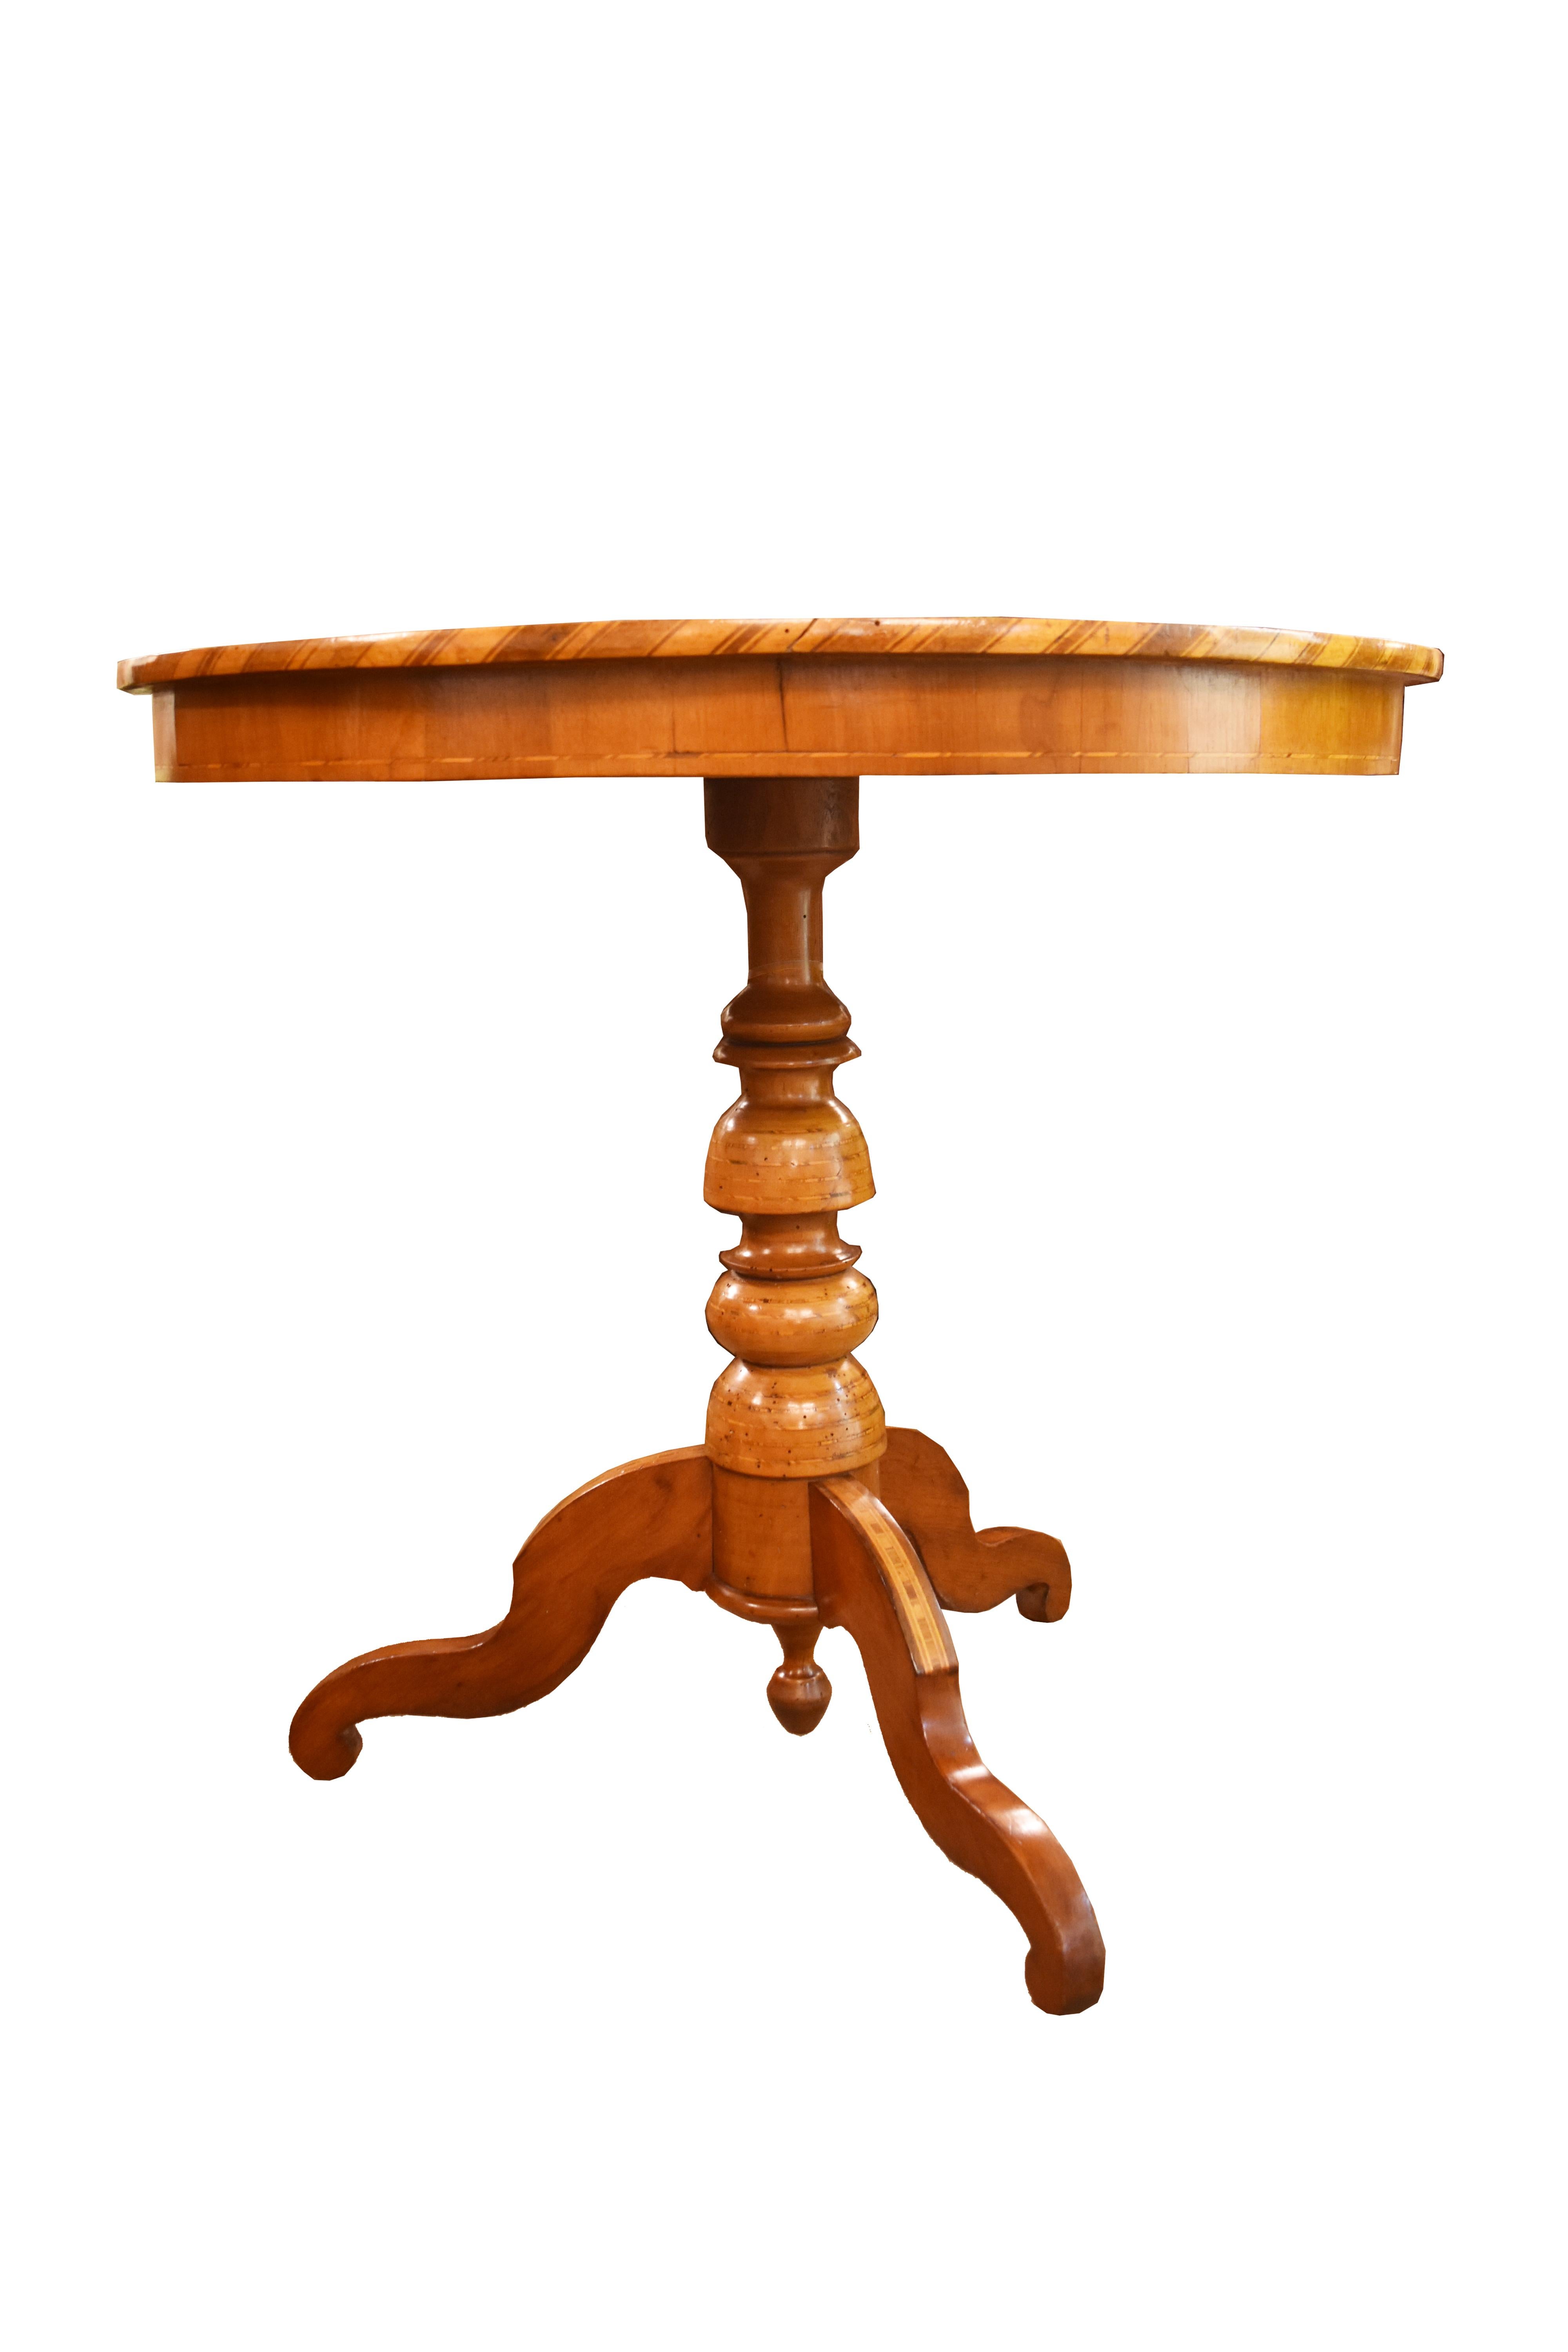 This Italian walnut pedestal table features intricate inlay with geometric parquetry. The inlay continues on the tripod base.